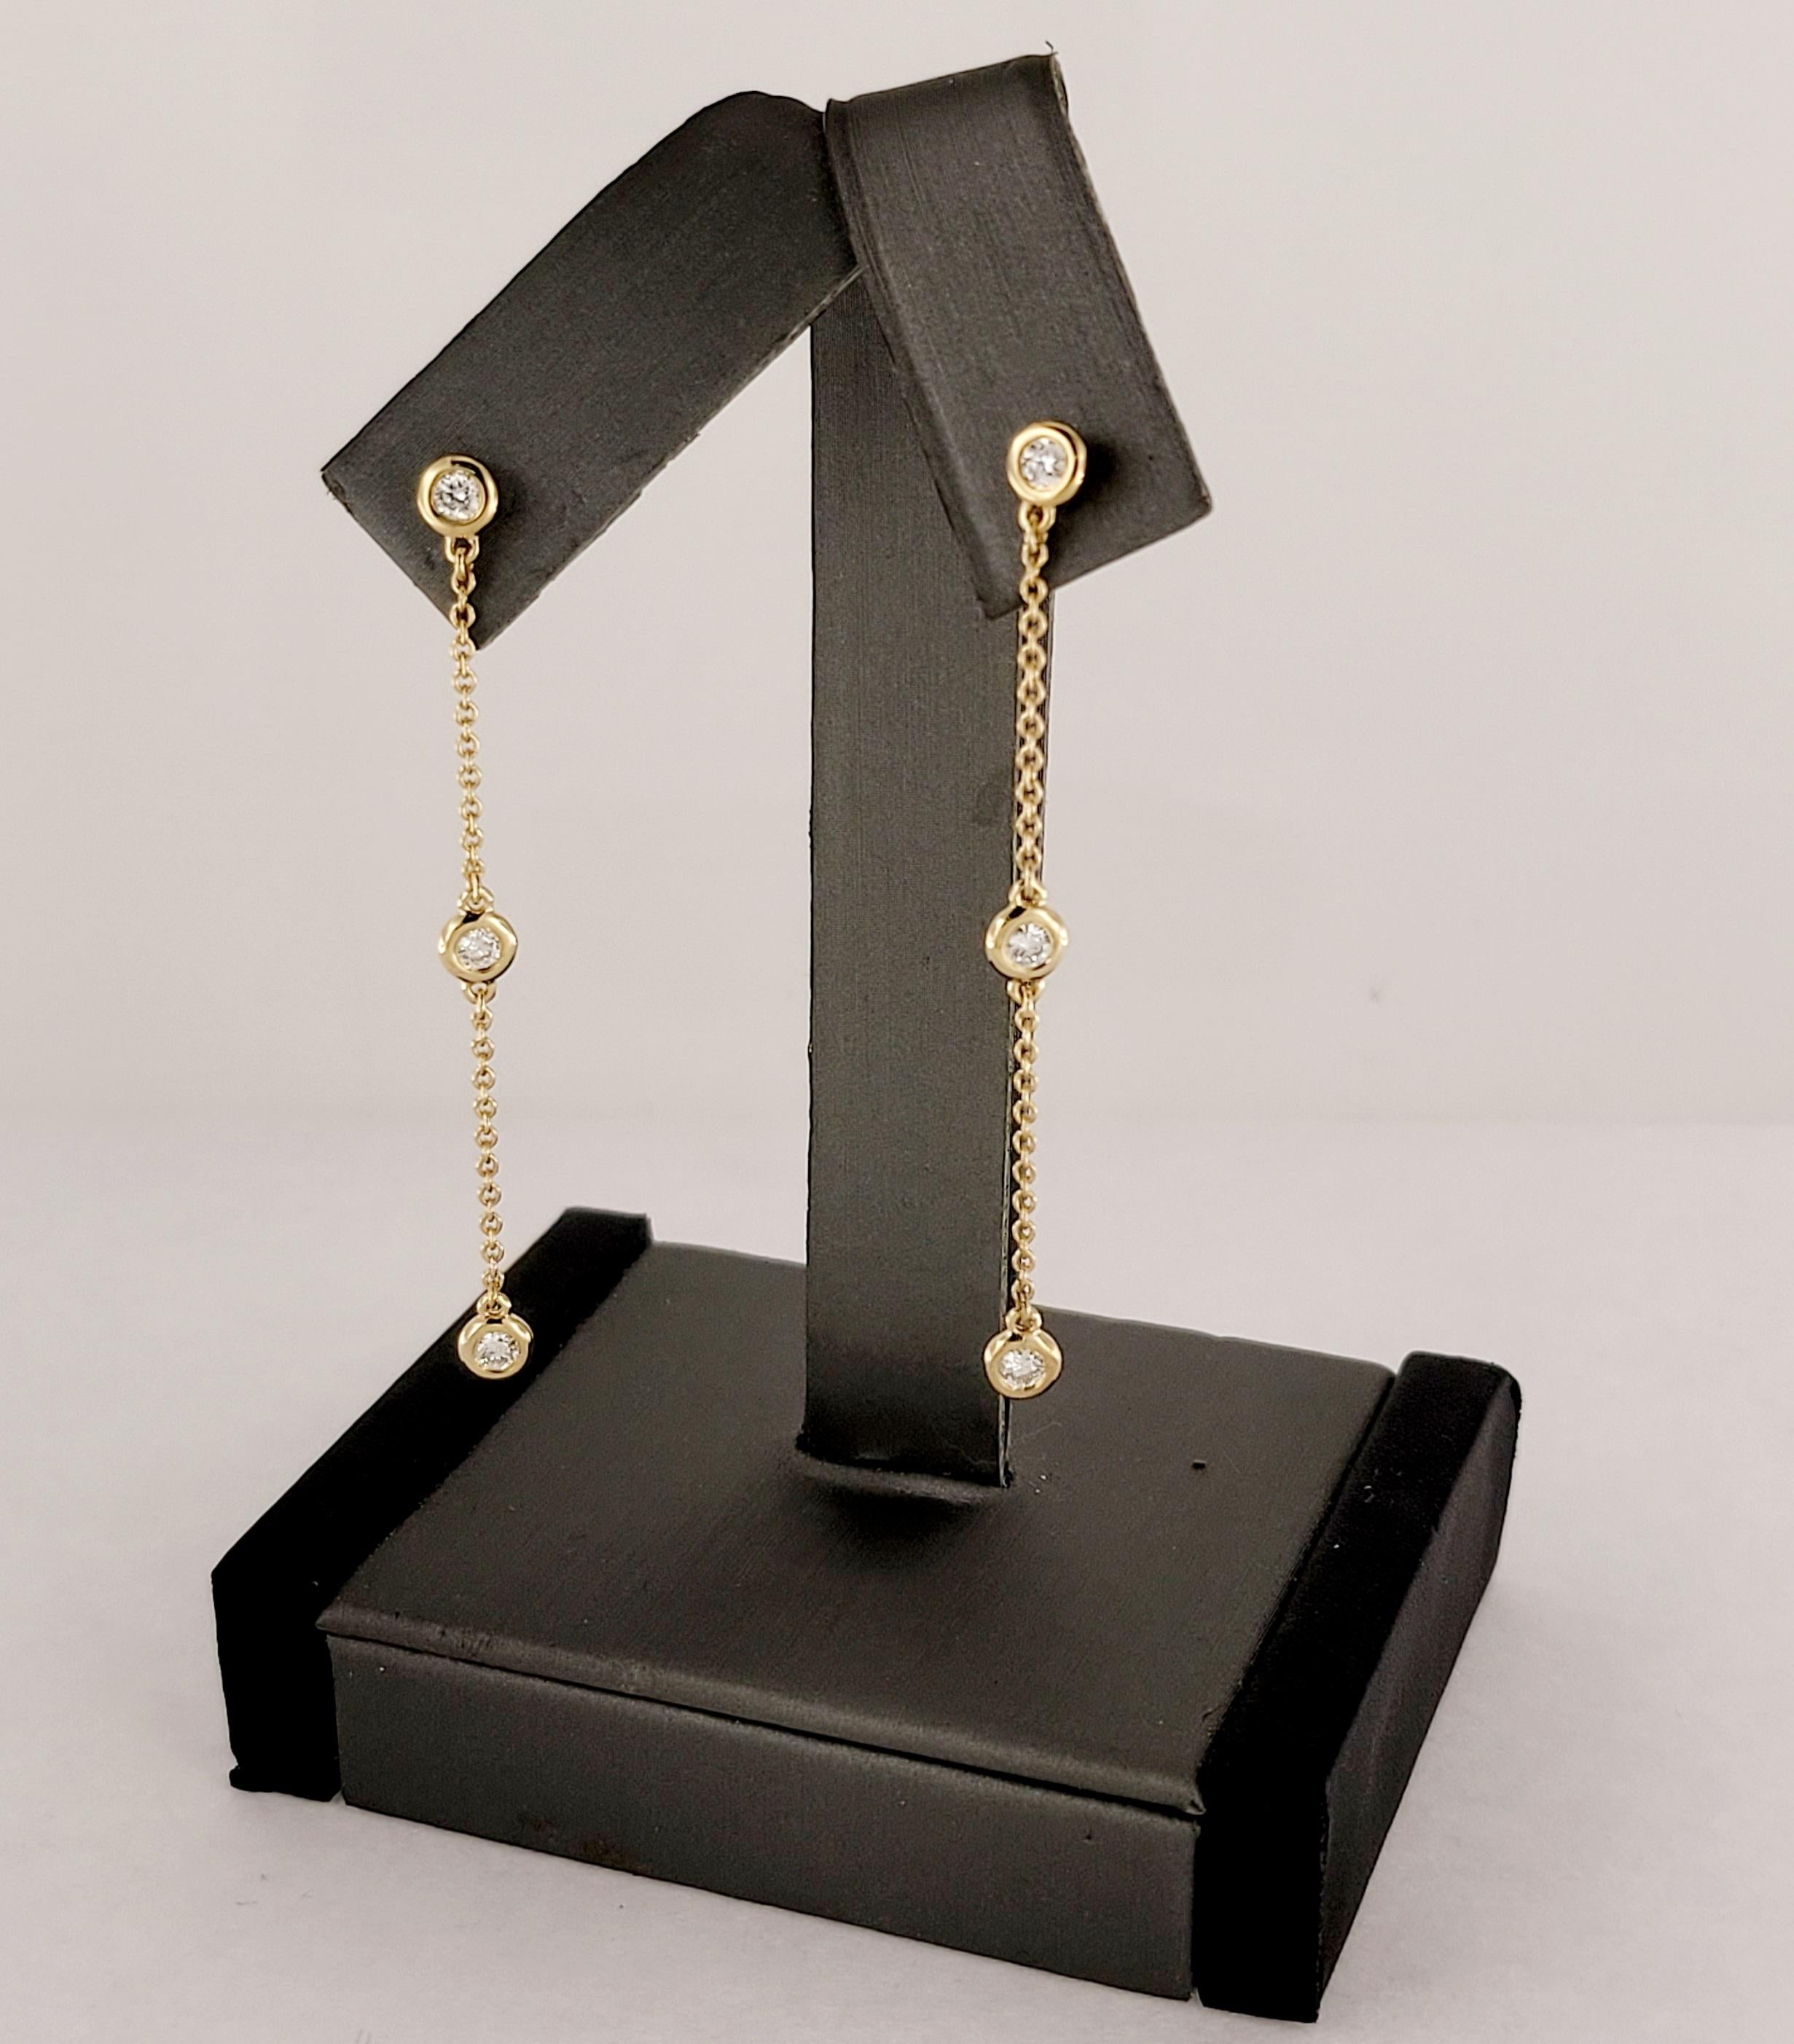 Tiffany & Co. Elsa Peretti Diamonds by the Yard Drop Earrings In Excellent Condition For Sale In New York, NY